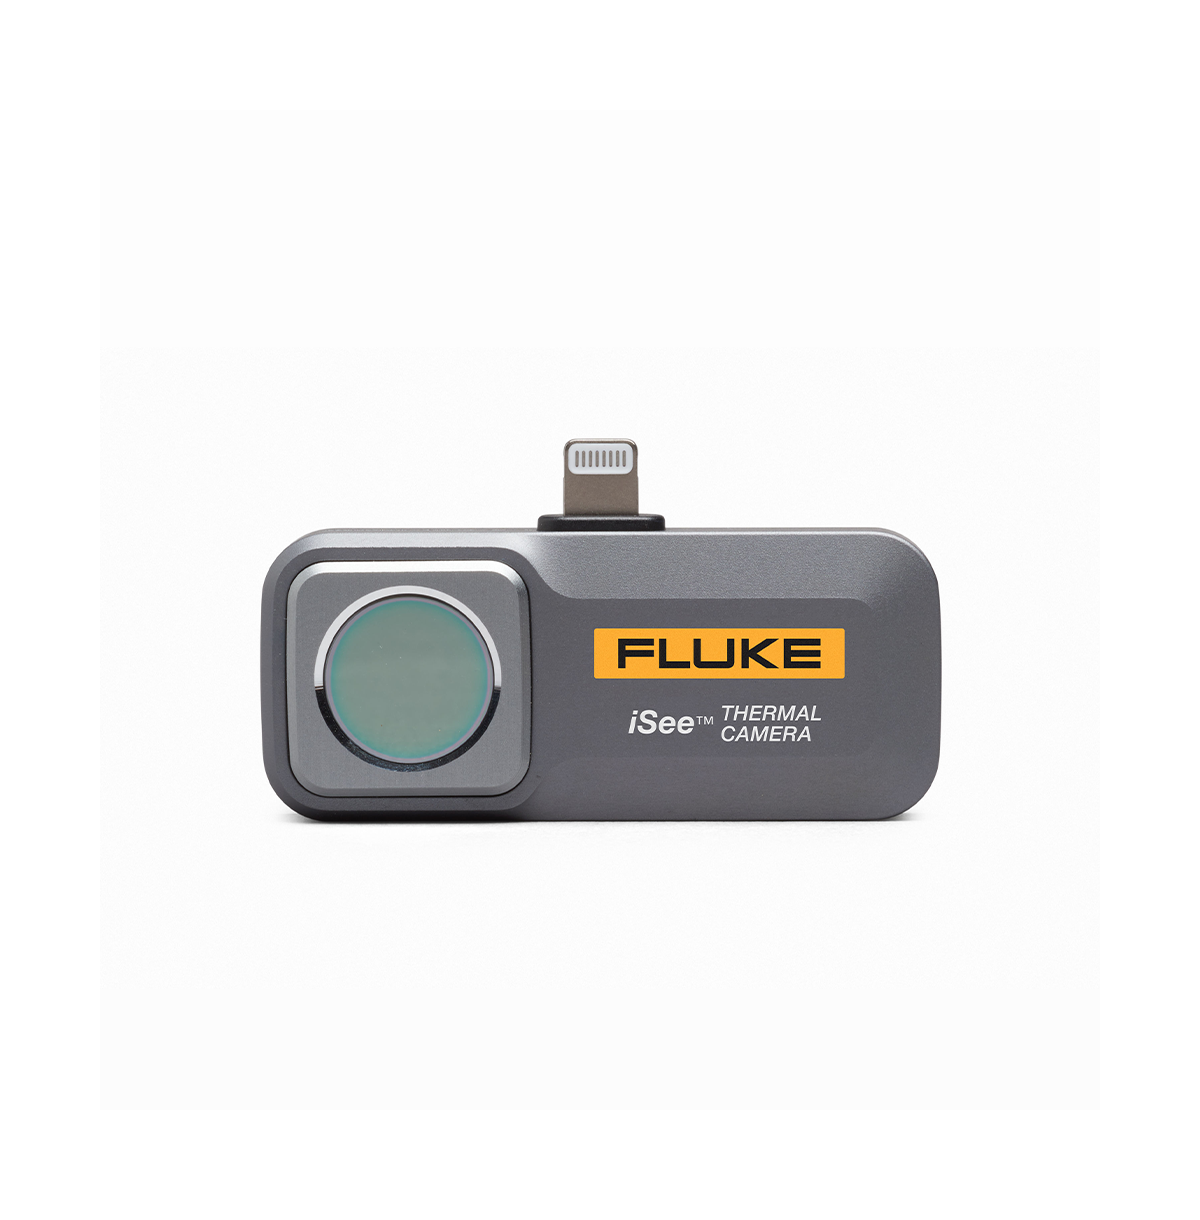 Fluke iSee TC01B IR Thermal Camera Imager 256x192 25HZ For Smartphone IOS